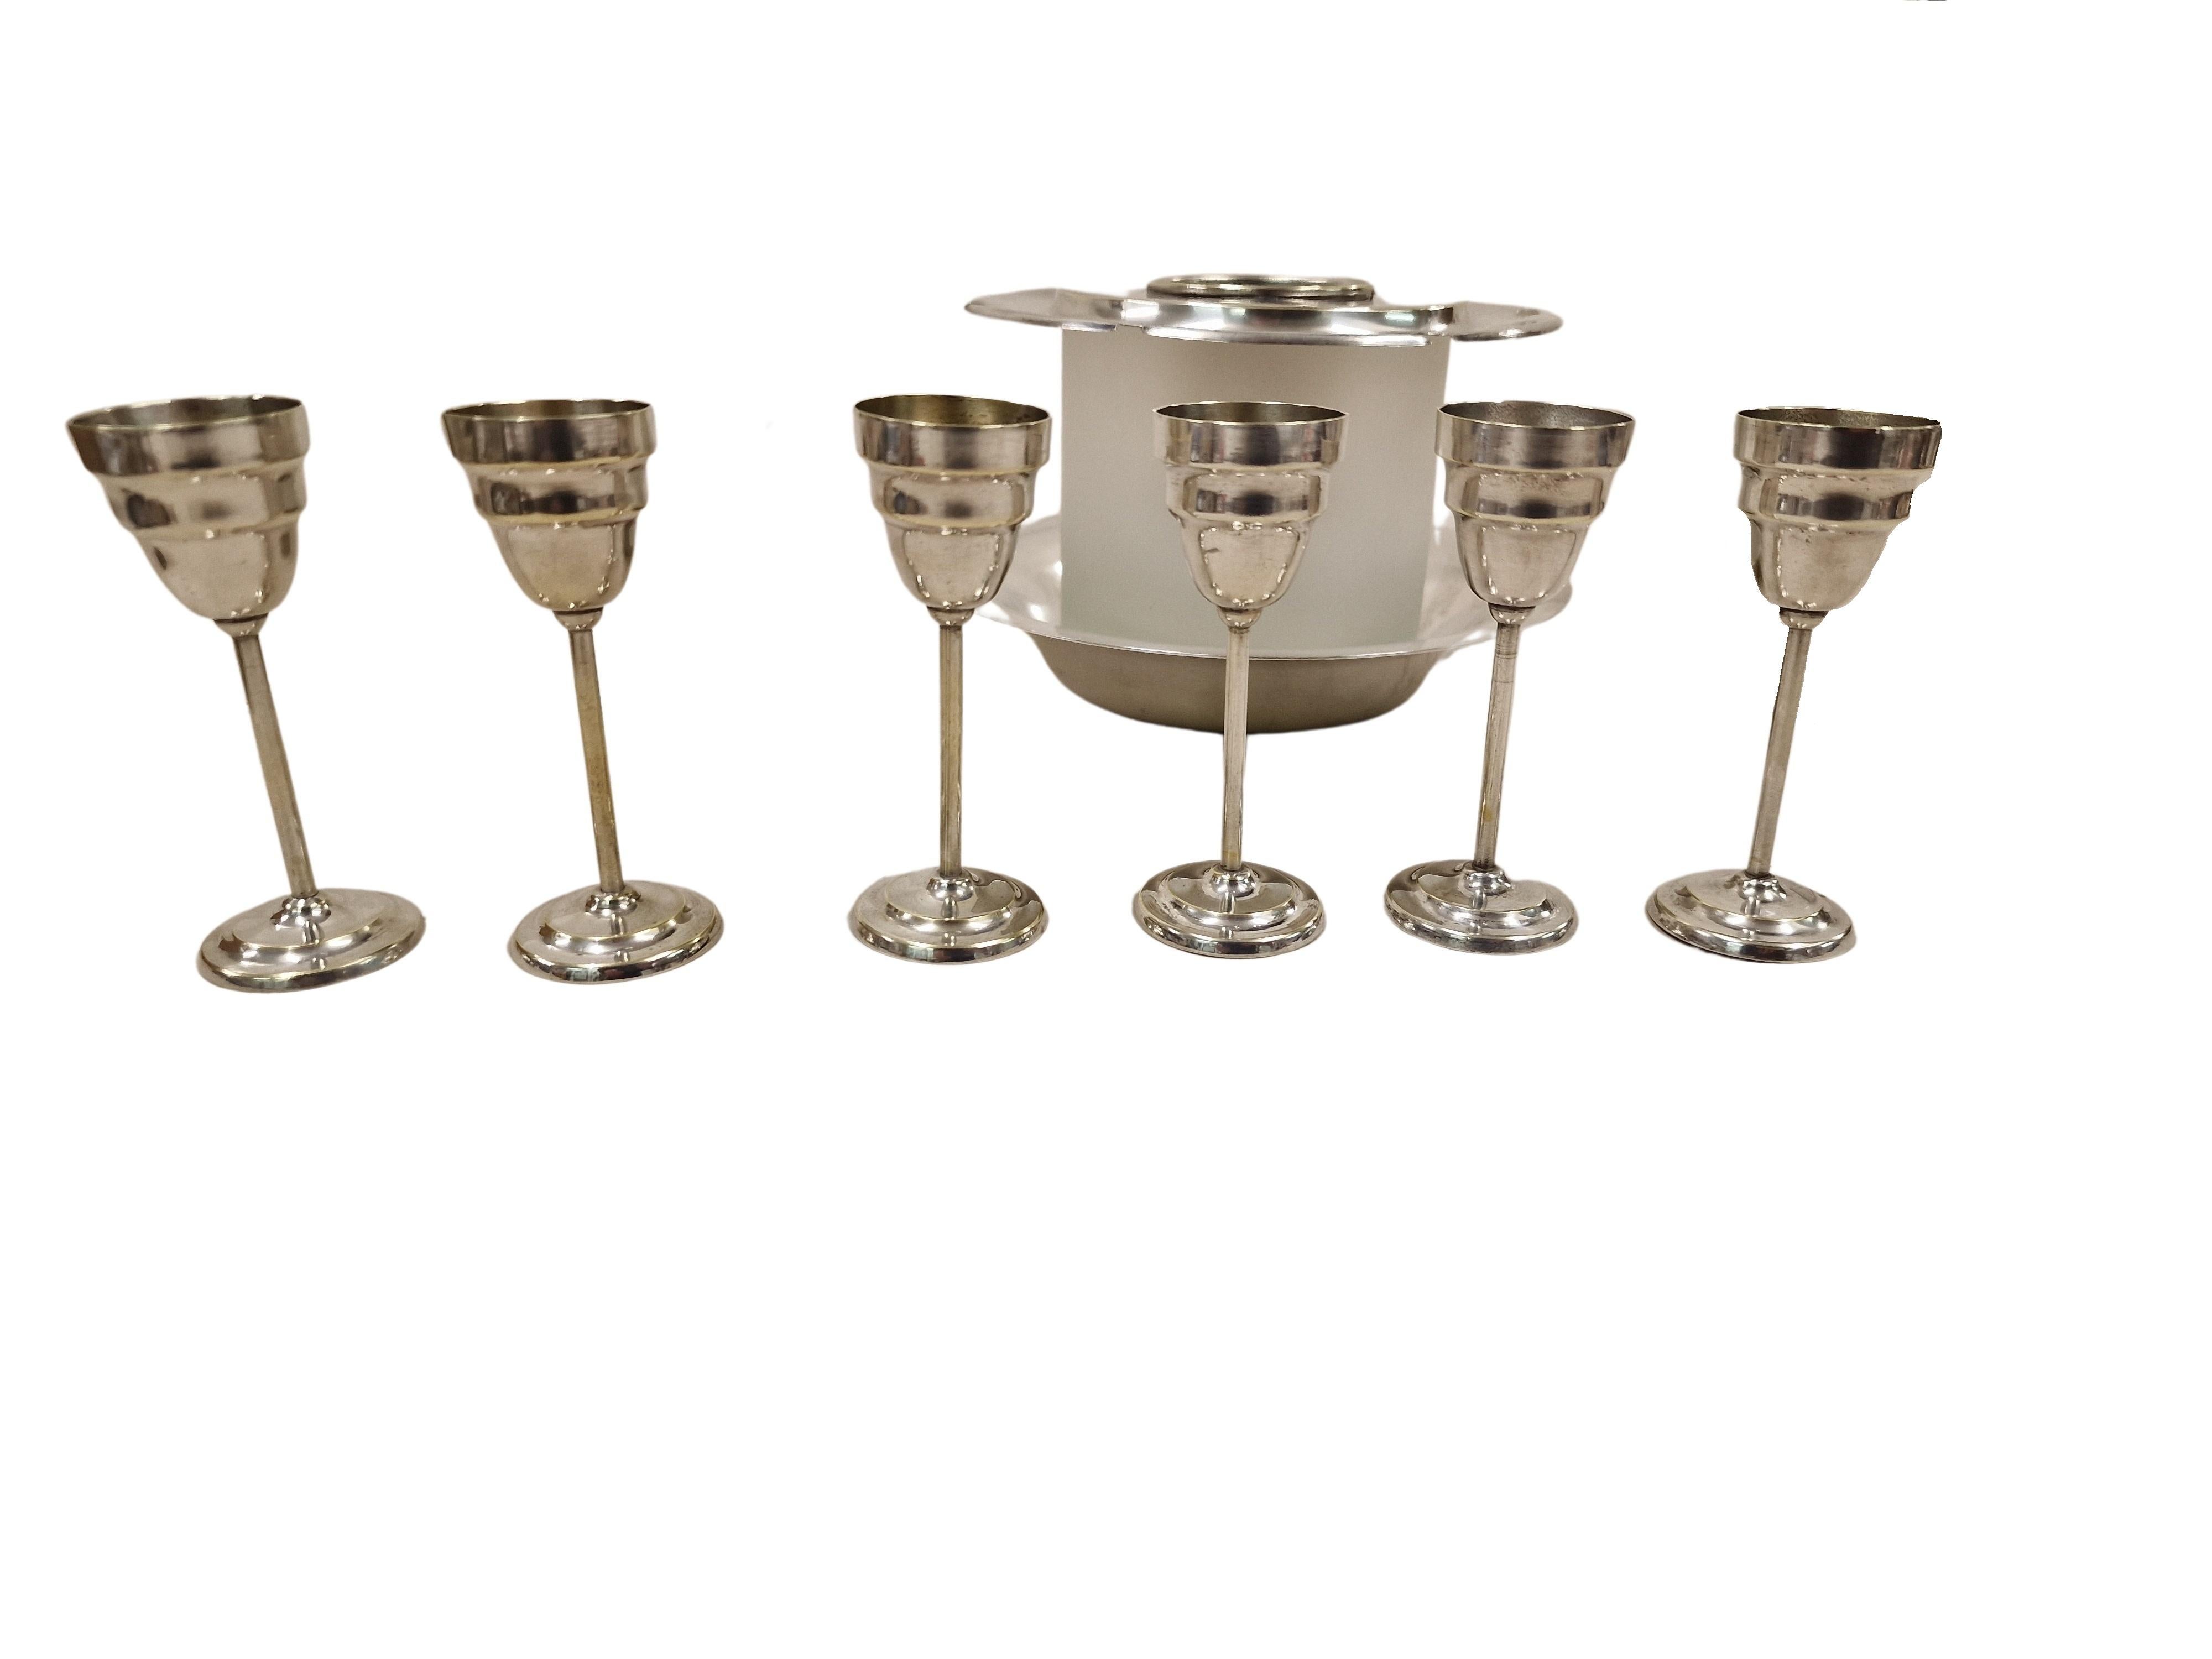 Liqueur set, silvered, 1 bottle with 6 cups, cooler system, WMF 1930s Germany For Sale 1